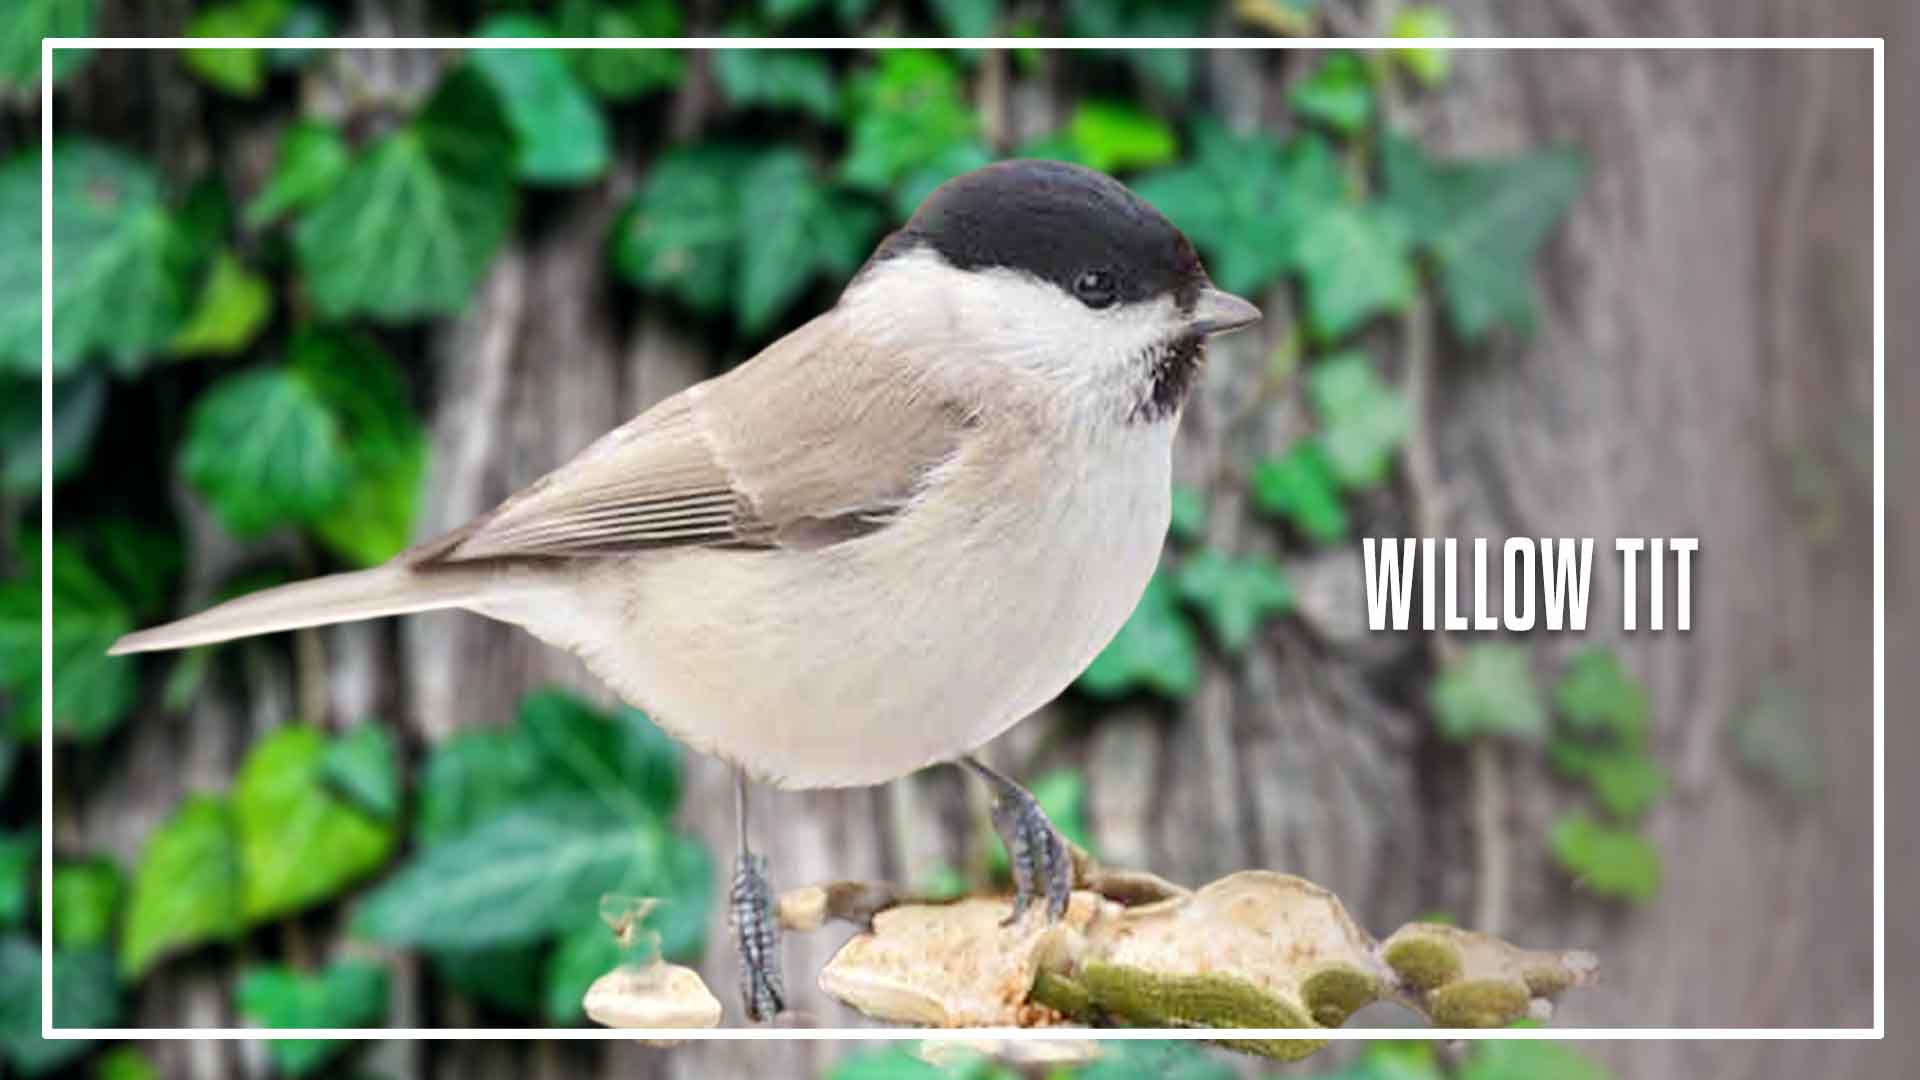 Types of Tit bird is a Willow tit